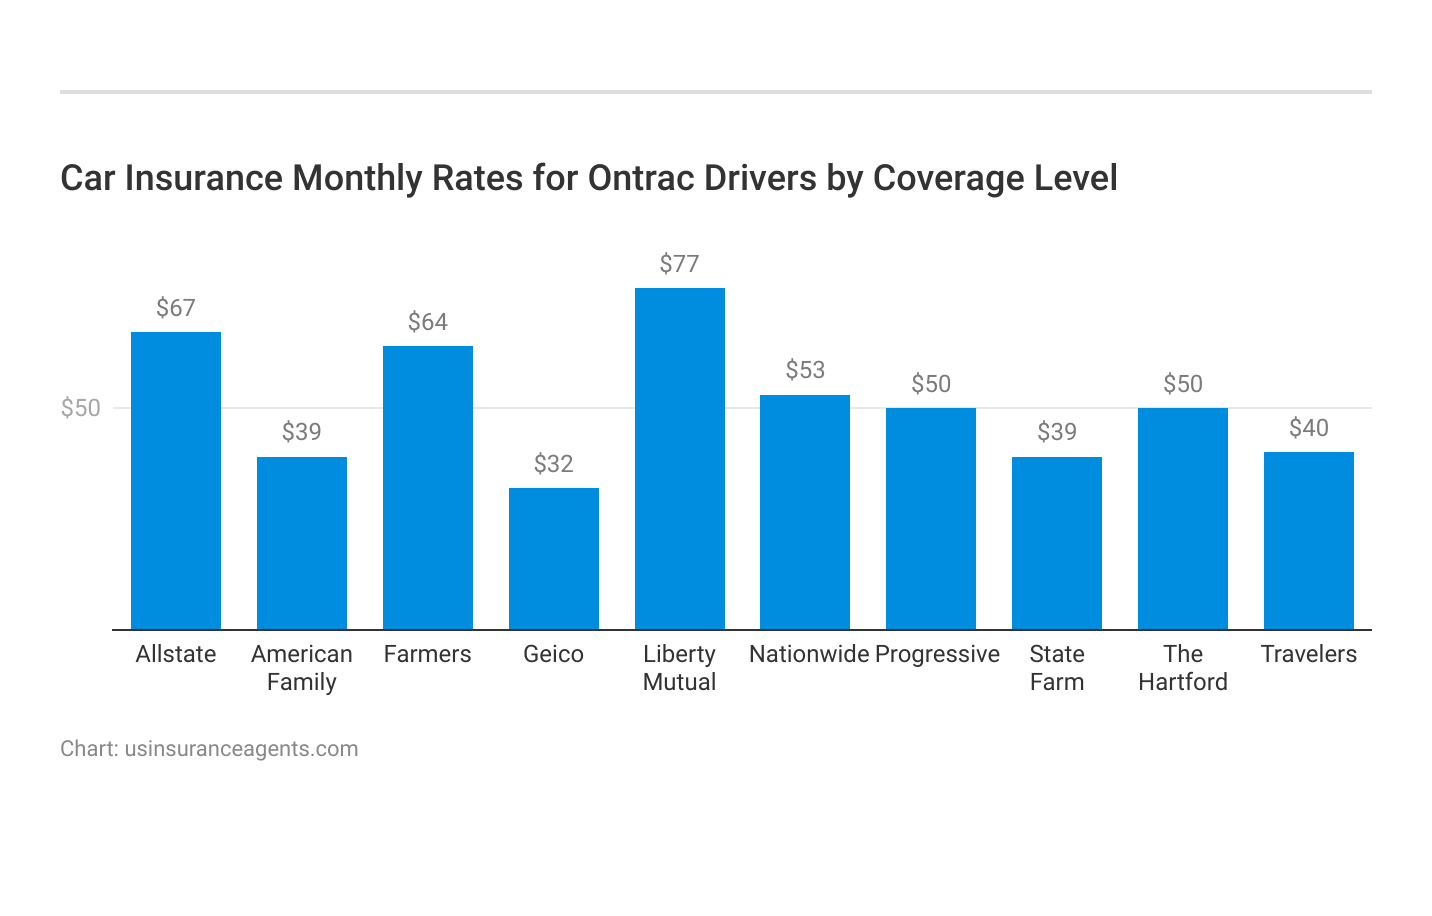 <h3>Car Insurance Monthly Rates for Ontrac Drivers by Coverage Level</h3>